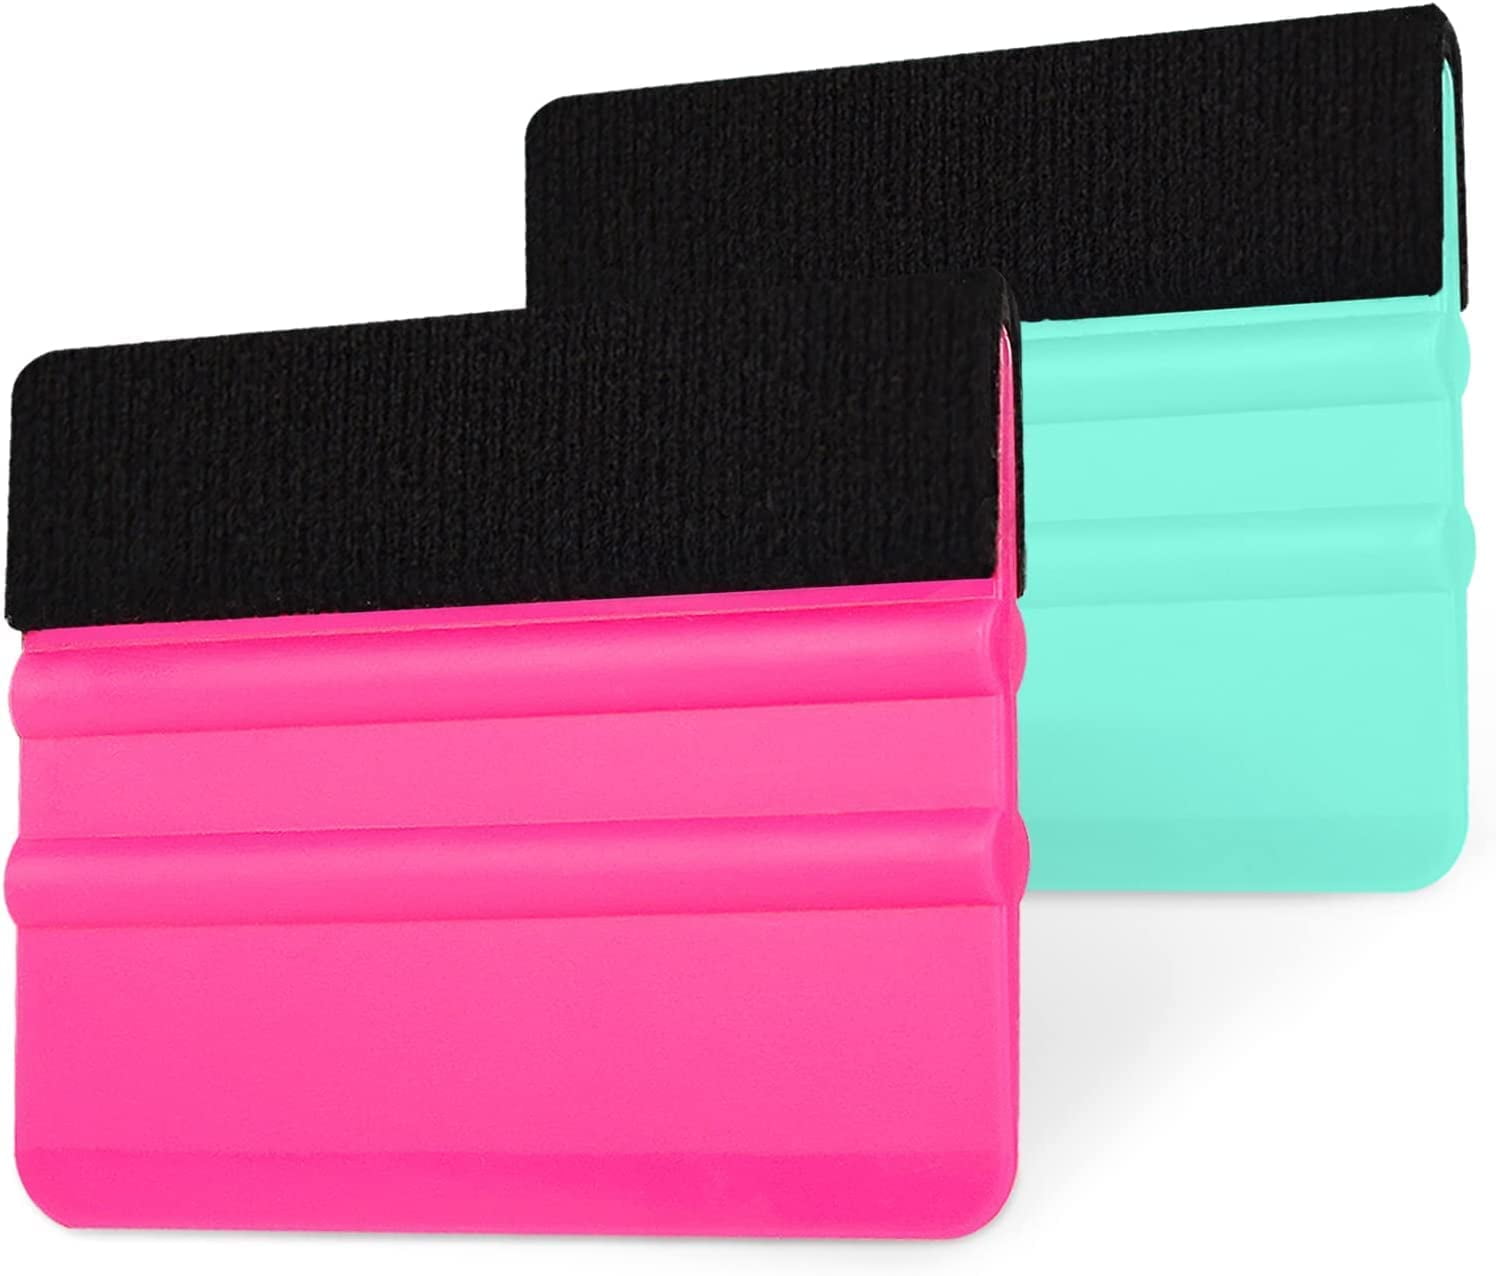 Pink Squeegee with Felt